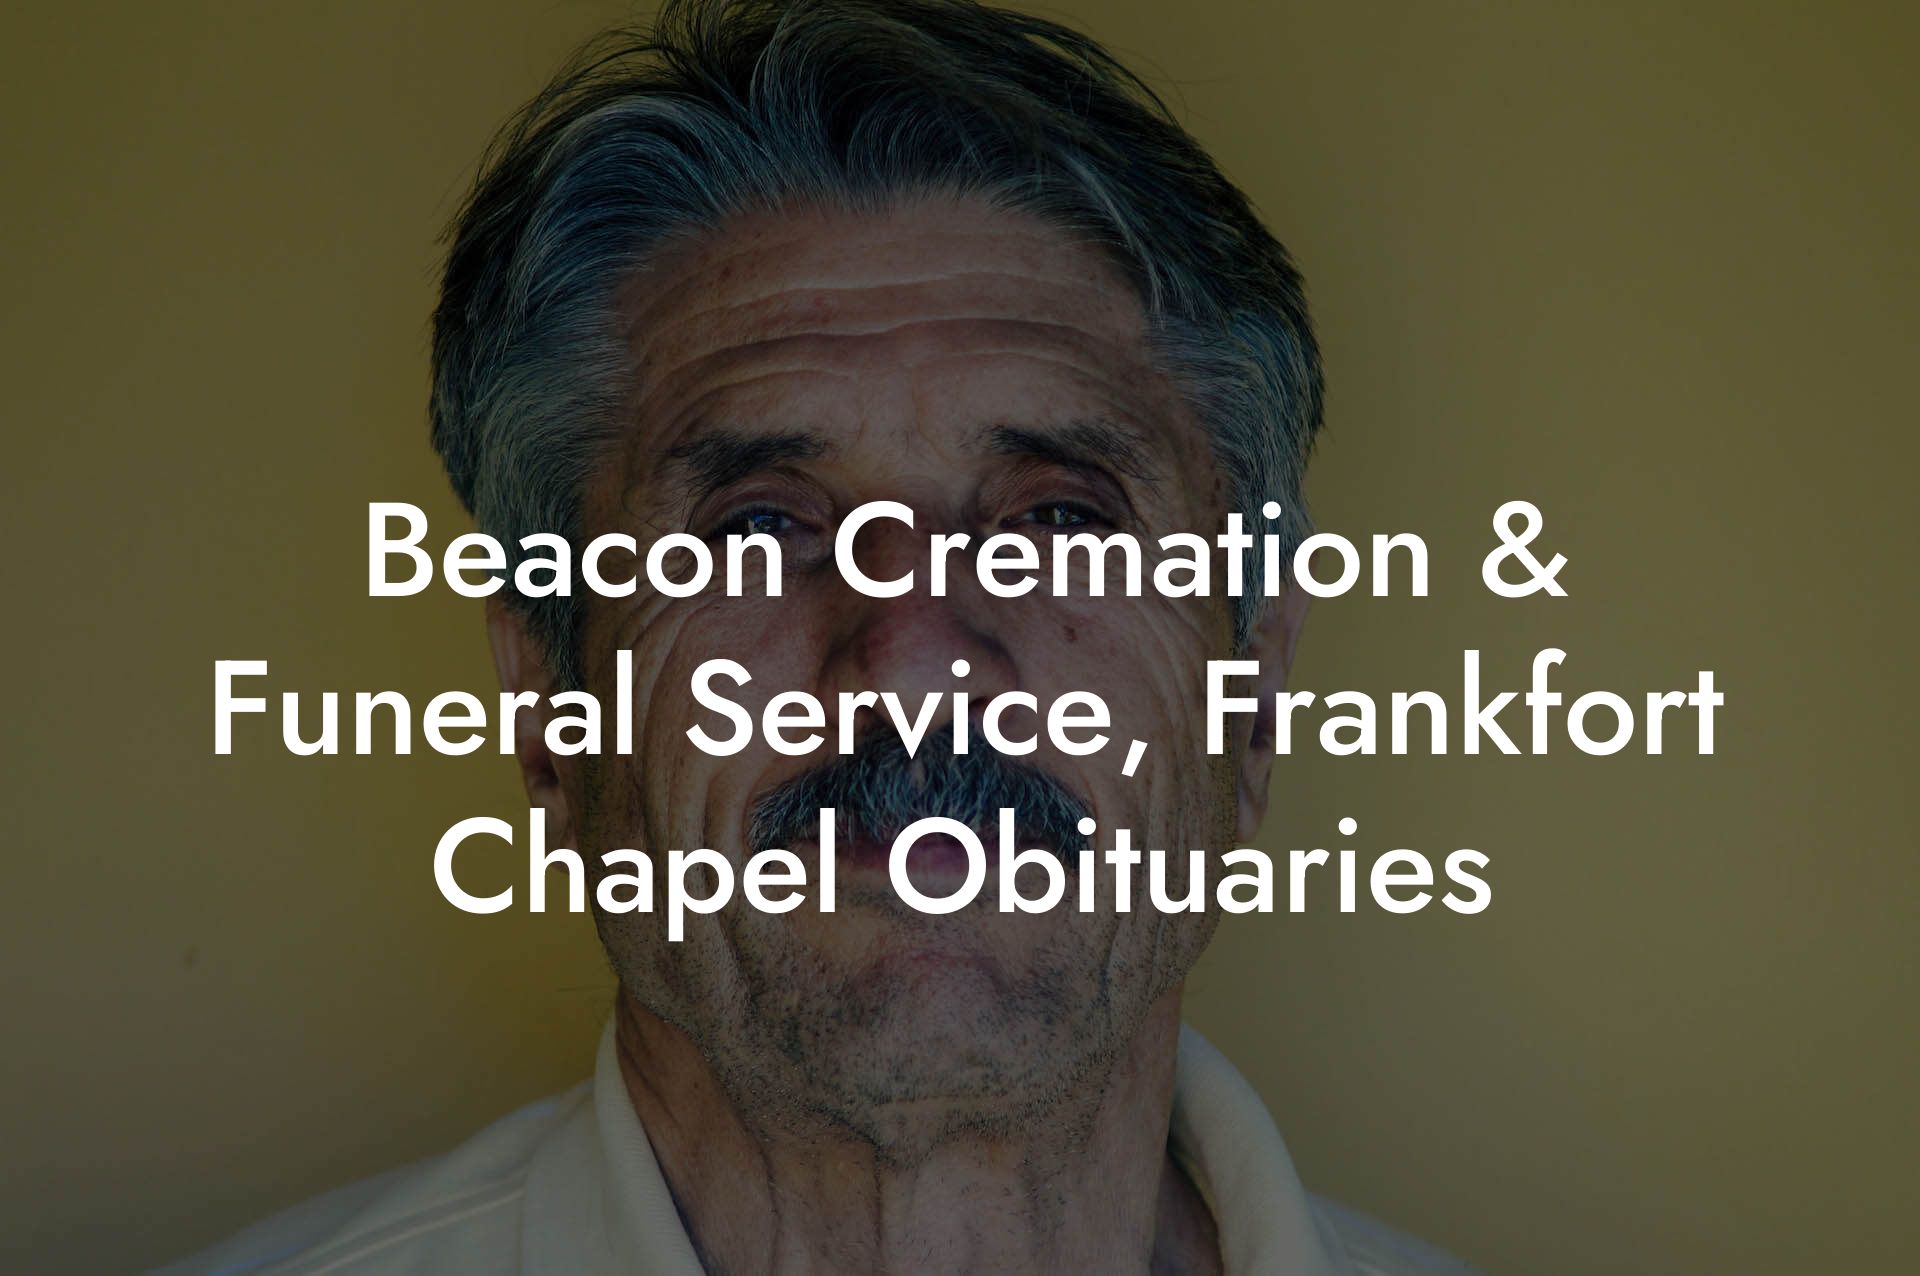 Beacon Cremation & Funeral Service, Frankfort Chapel Obituaries